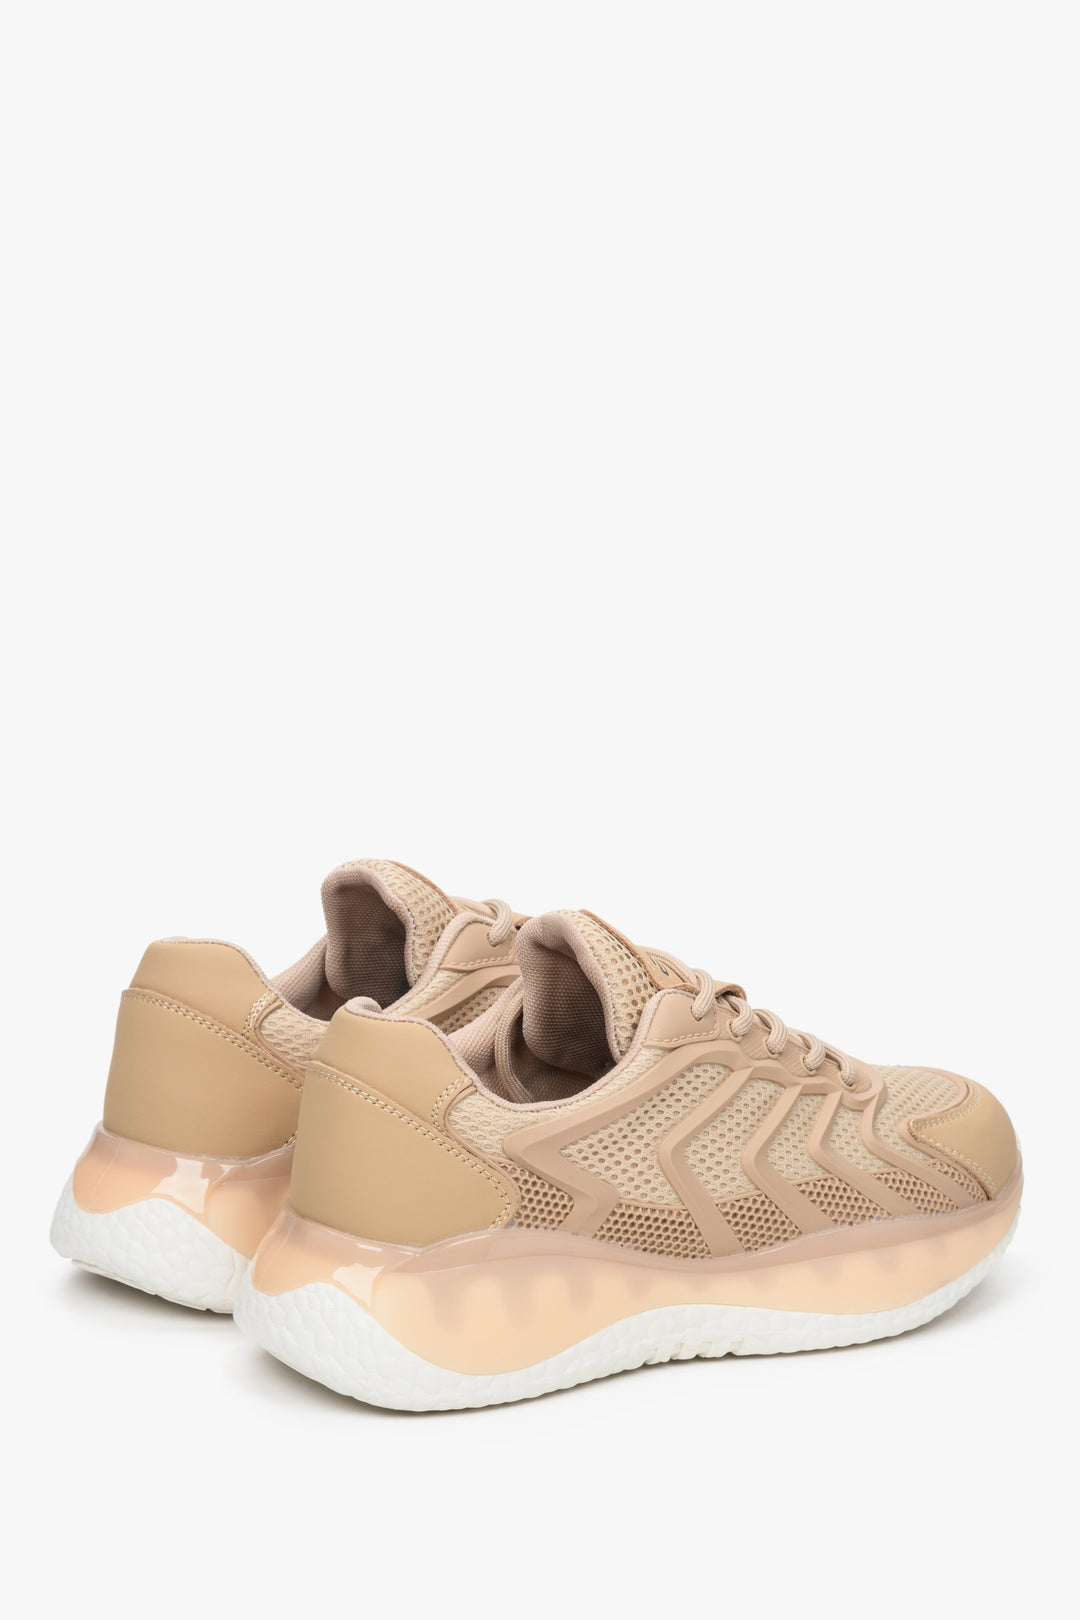 Women's beige sneakers with a chunky white sole by ES 8.